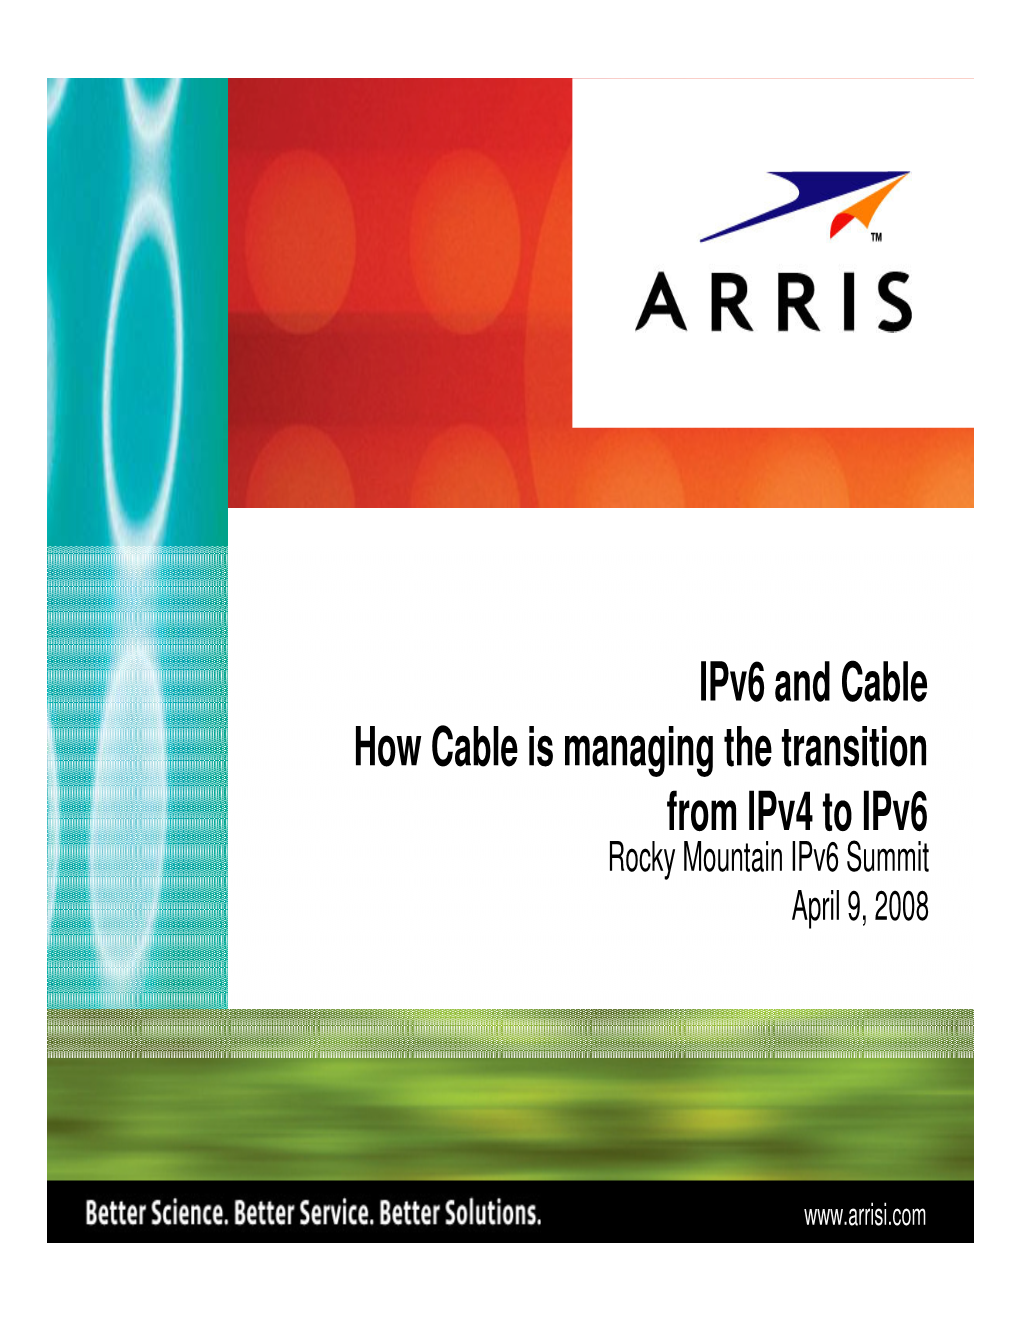 Ipv6 and Cable How Cable Is Managing the Transition from Ipv4 to Ipv6 Rocky Mountain Ipv6 Summit April 9, 2008